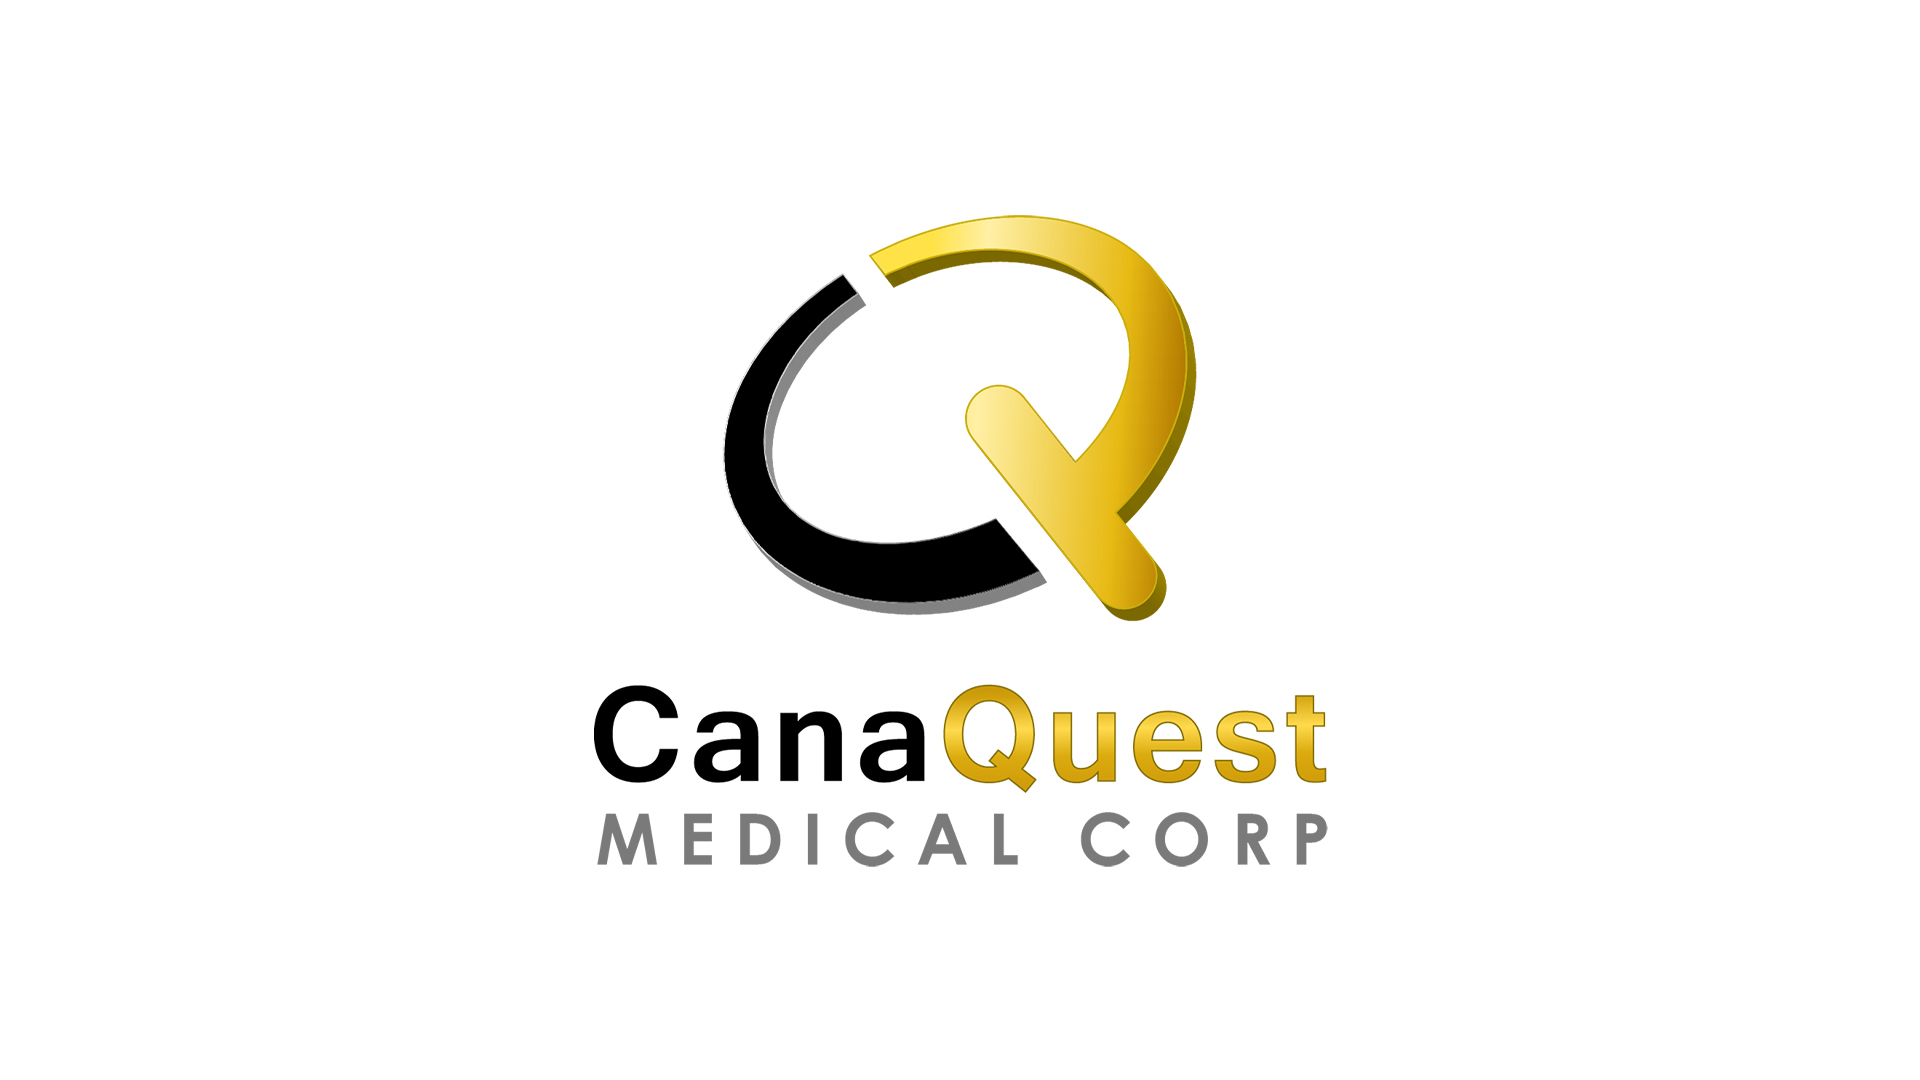 CanaQuest Medical Corp winner of the Go Global Awards